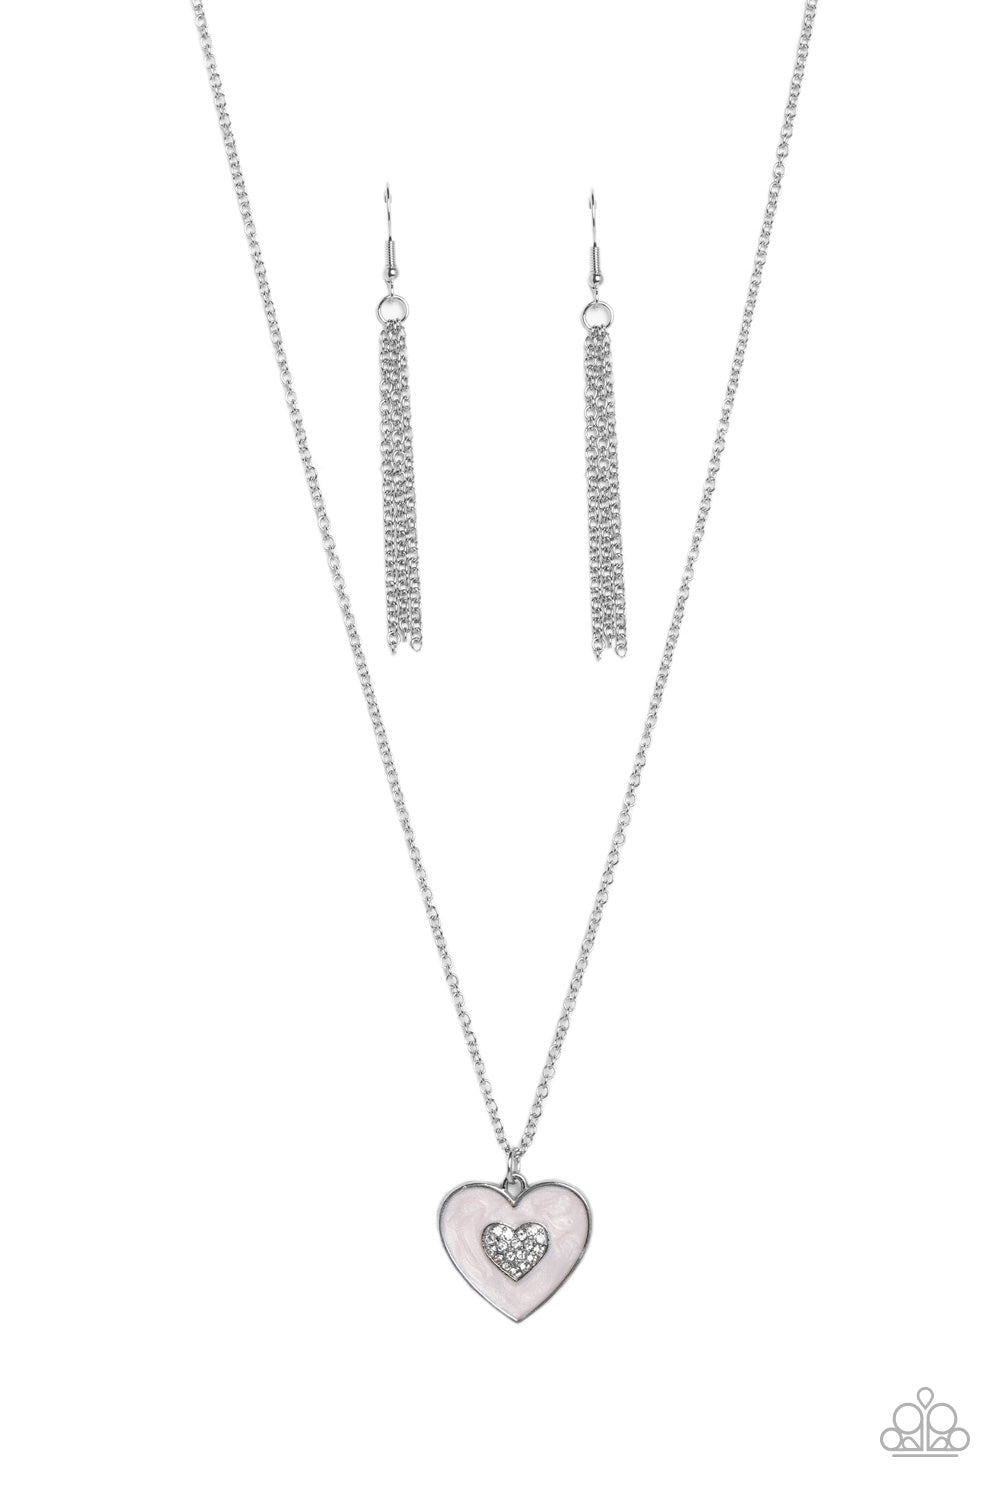 So This Is Love Paparazzi Accessories Necklace with Earrings Pink